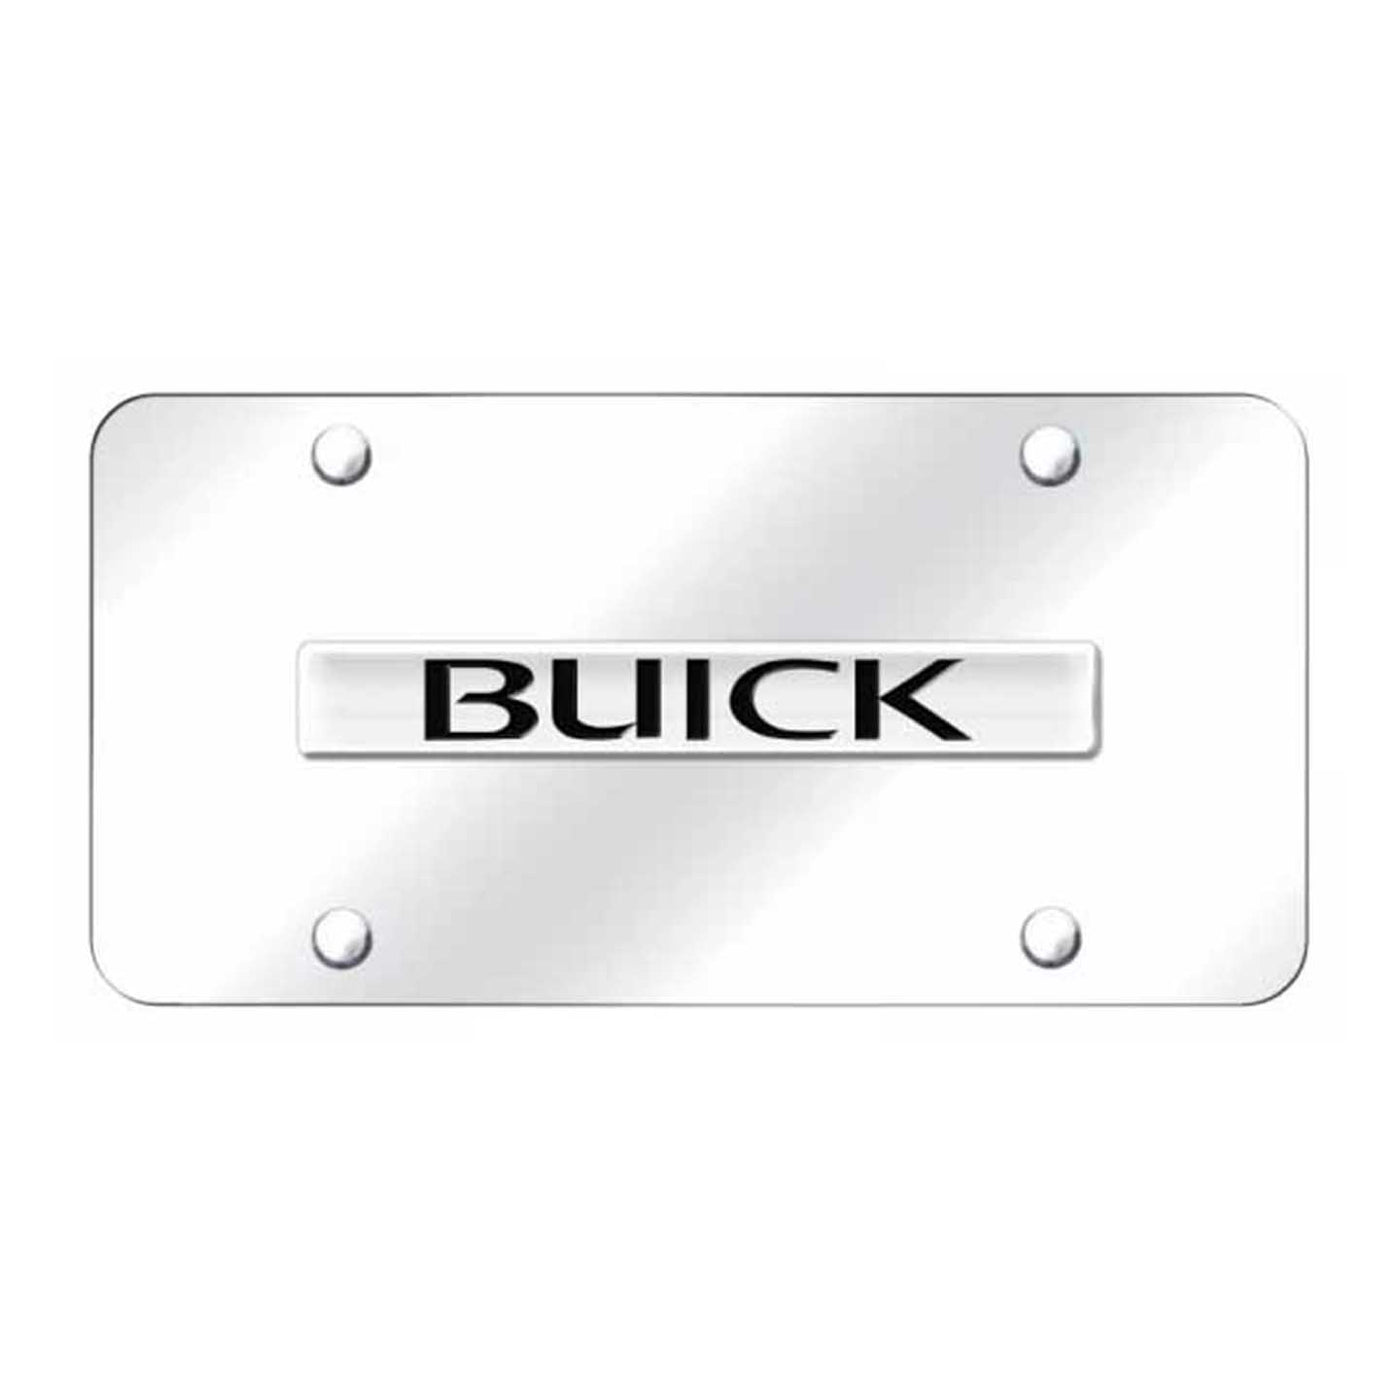 Buick Name License Plate - Chrome on Mirrored